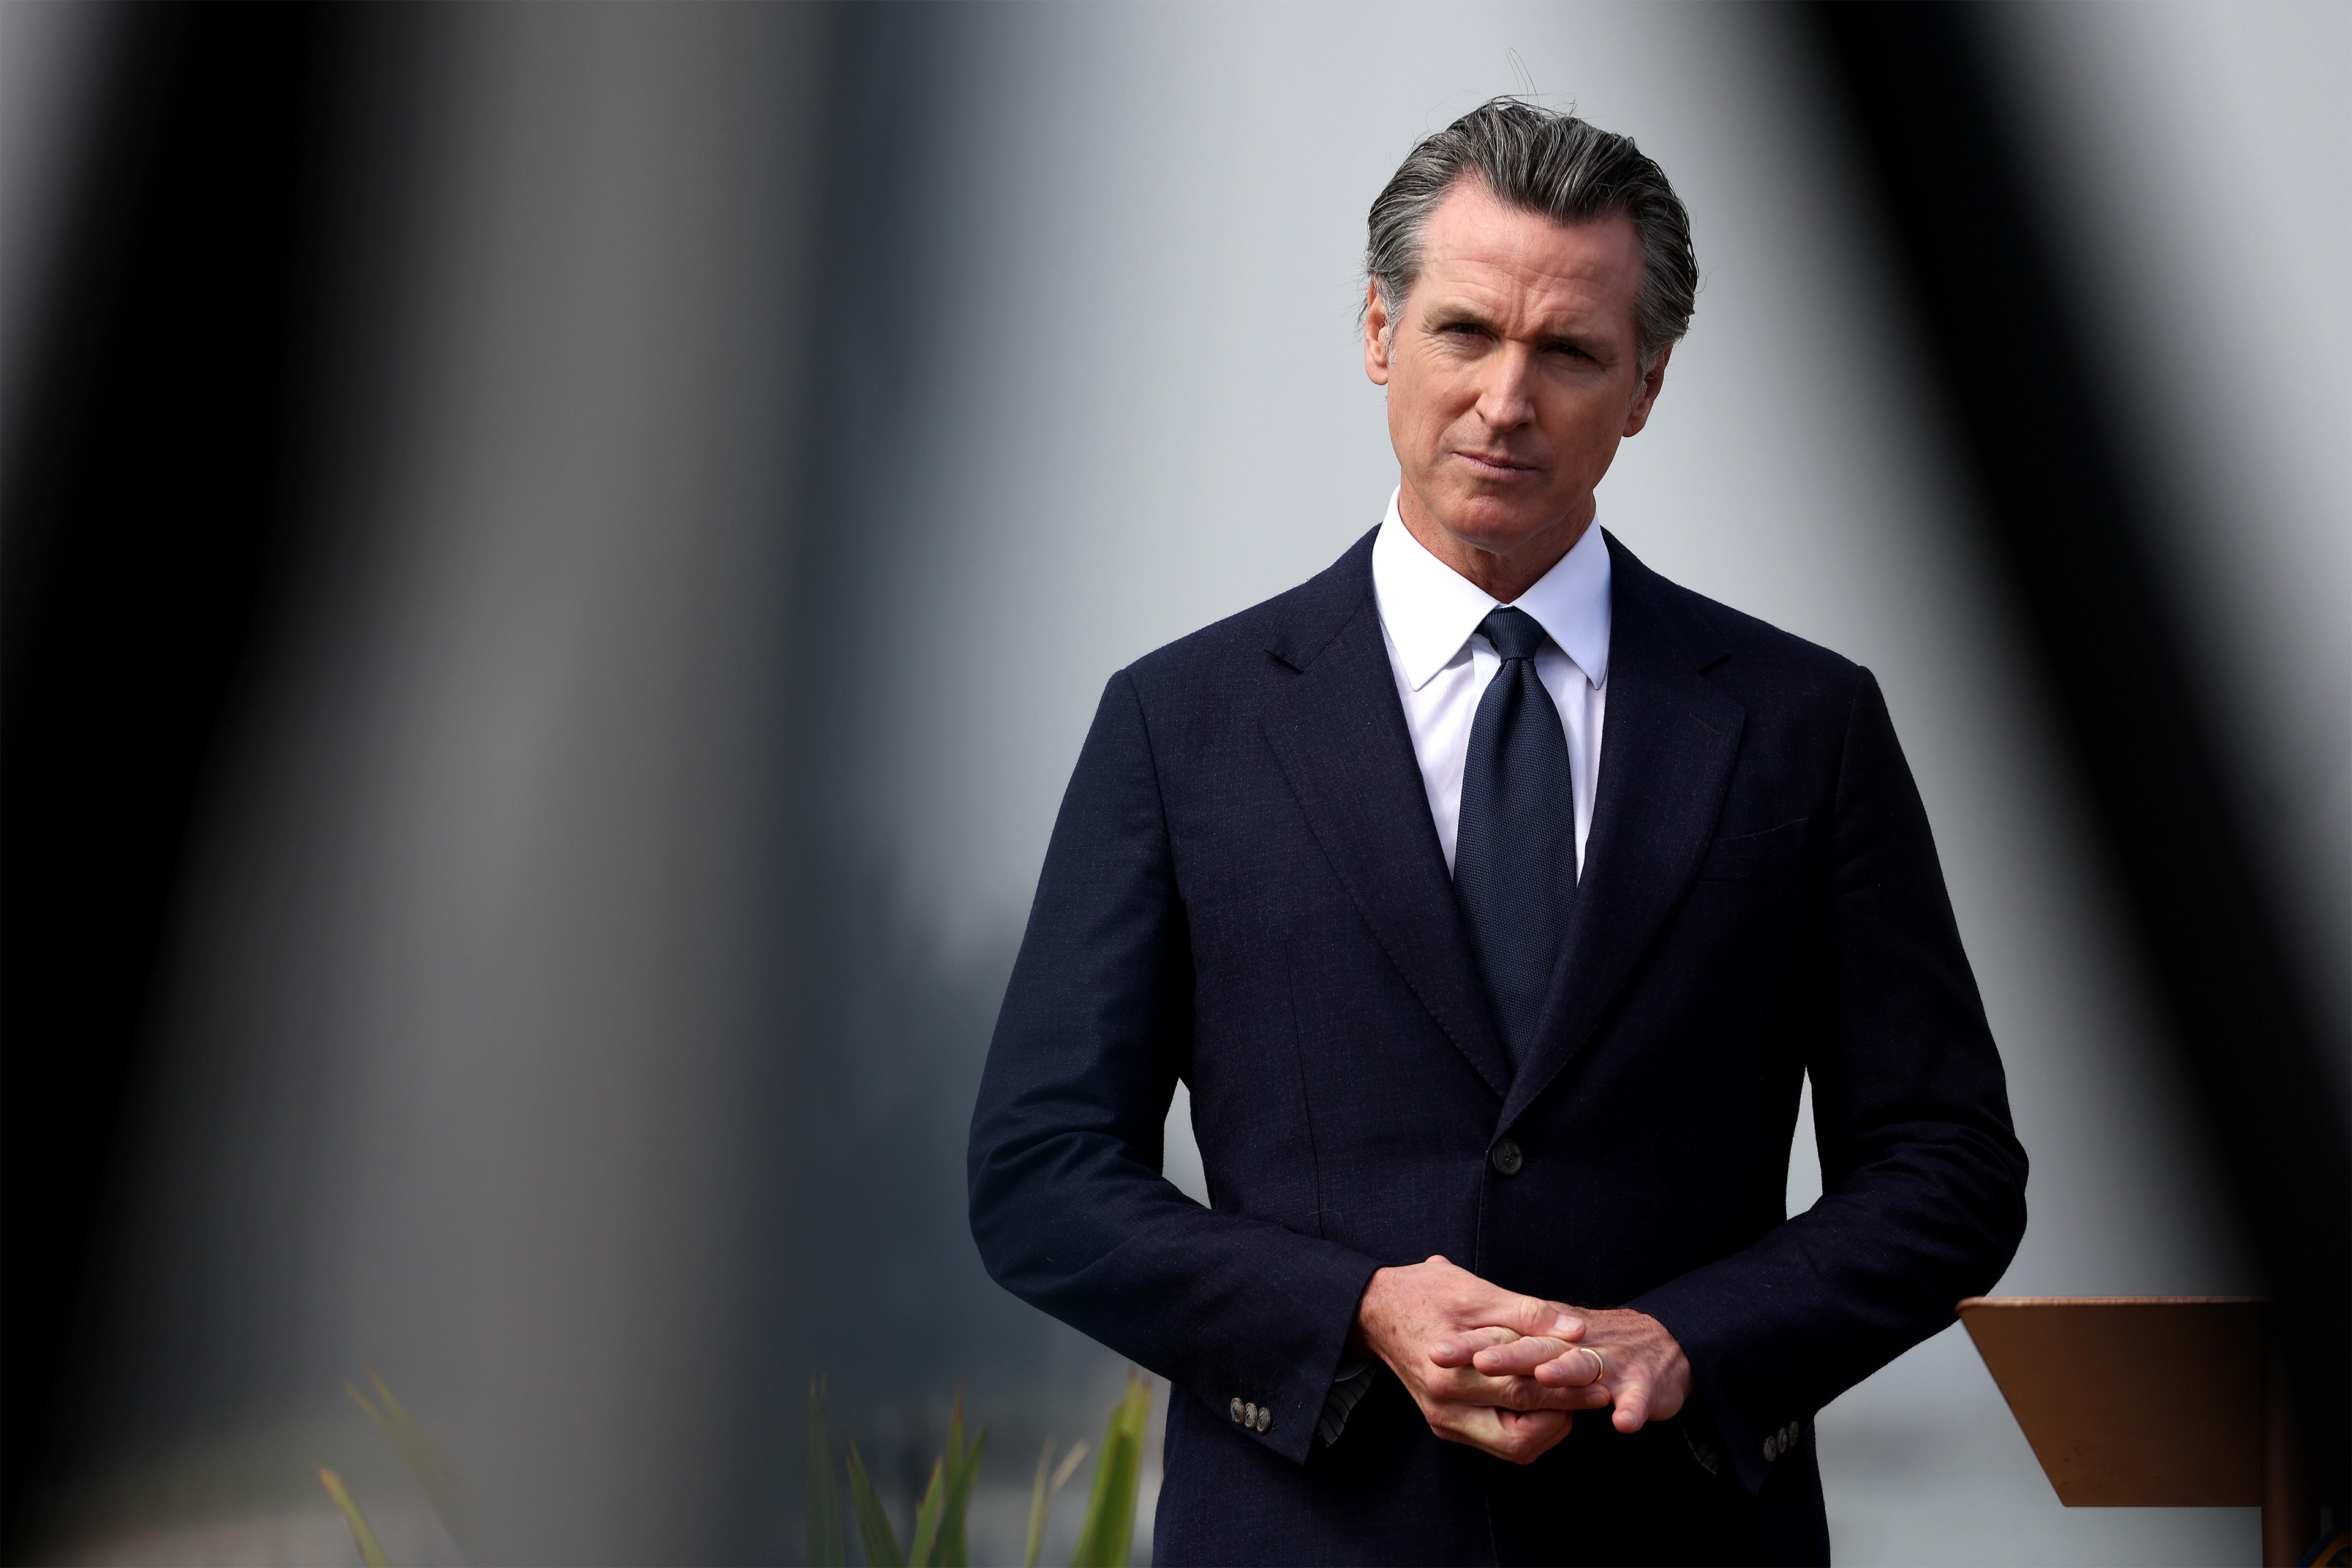 A photo shows Gov. Gavin Newsom standing outside during a press conference.